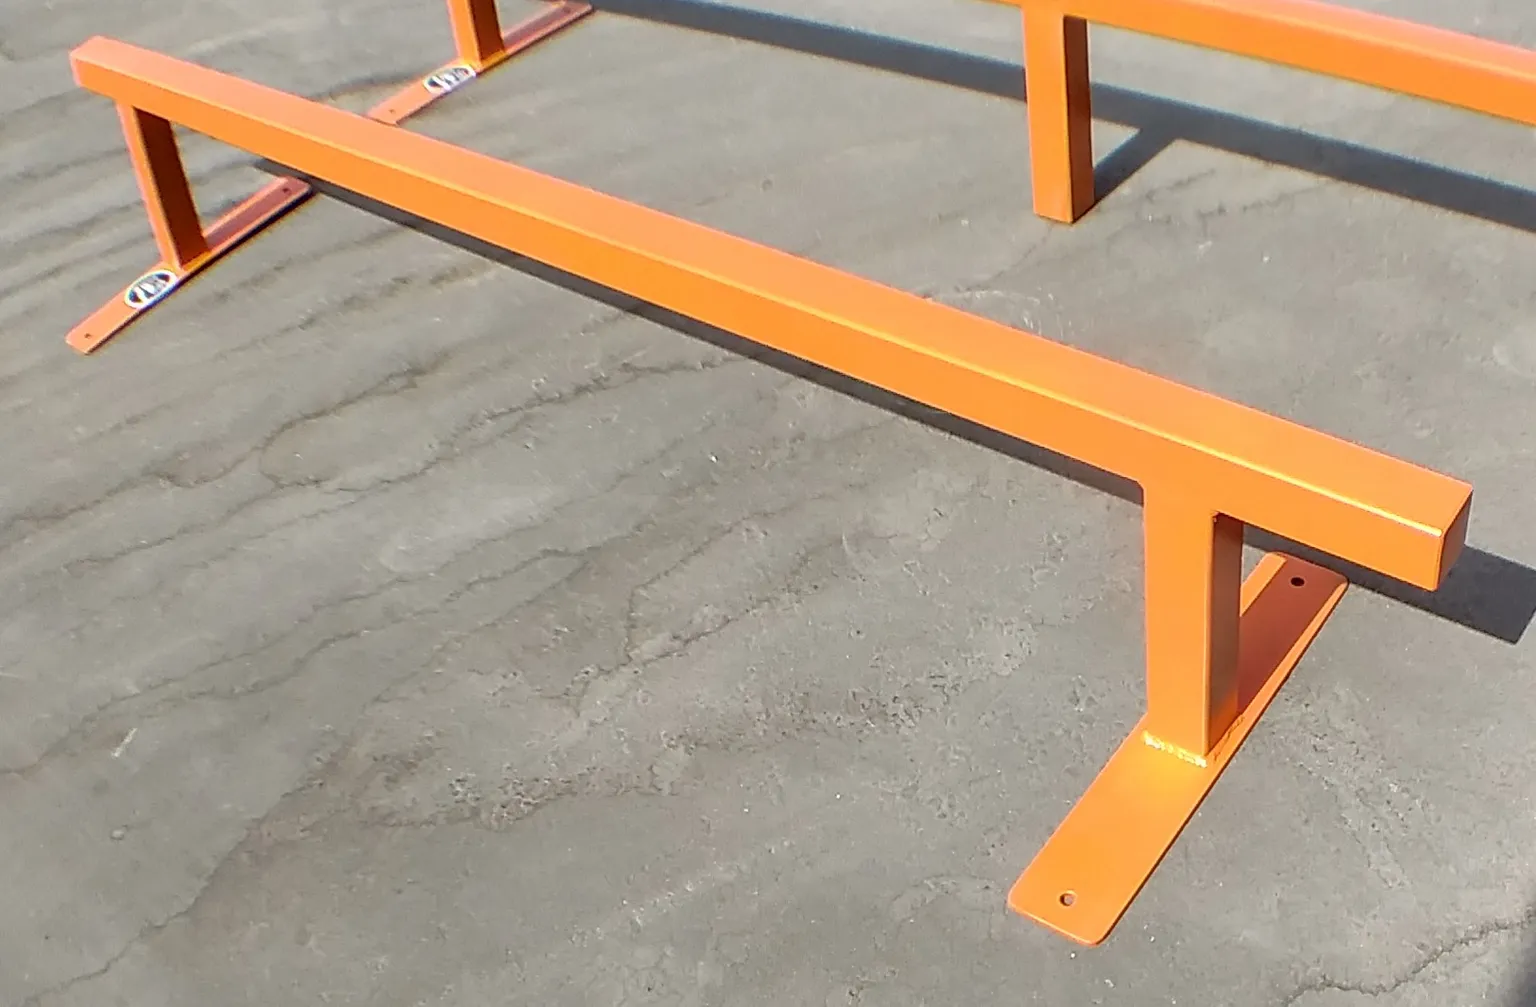 Two orange flat bar skate rails side by side, one foot high by six foot long and one foot high by eight foot long